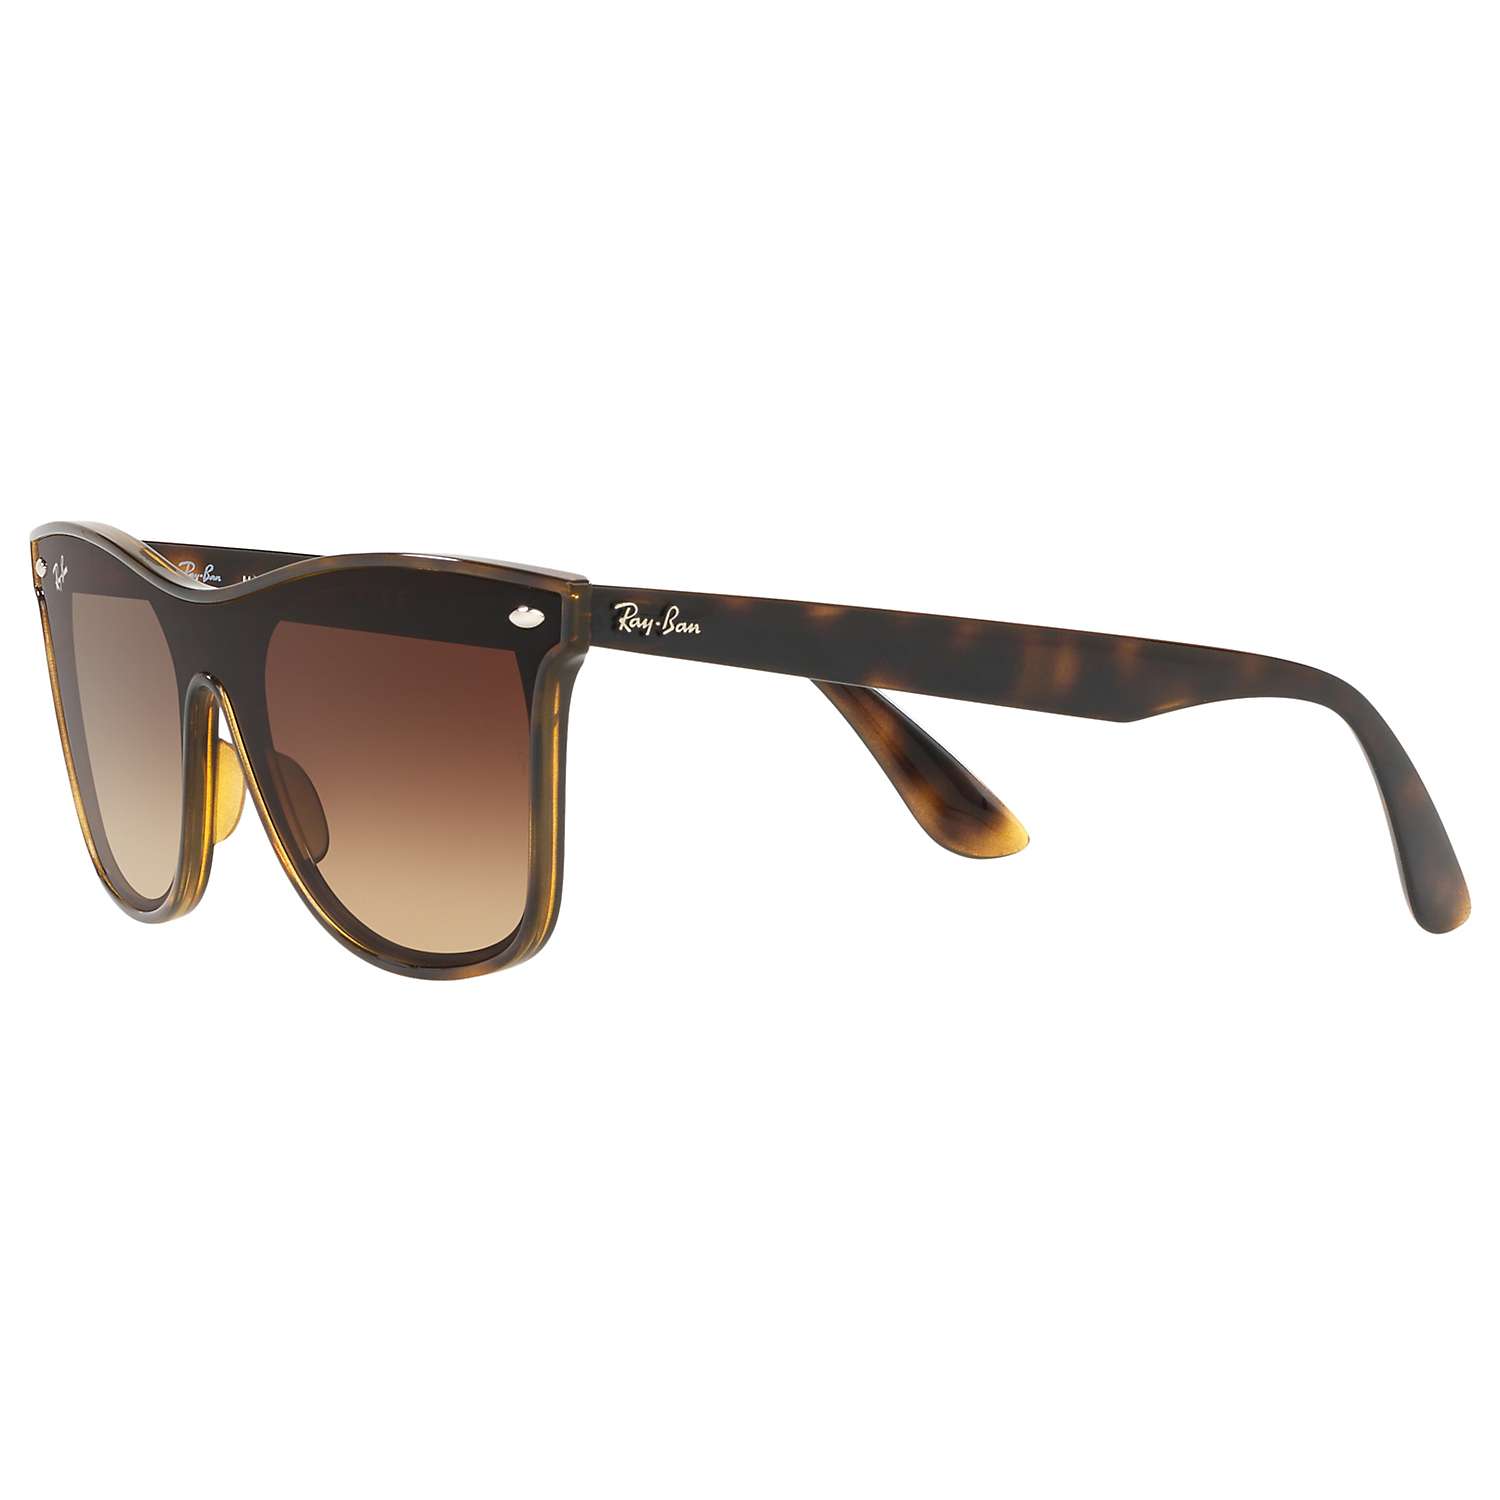 Buy Ray-Ban RB4440 Unisex Mirrored Sunglasses Online at johnlewis.com